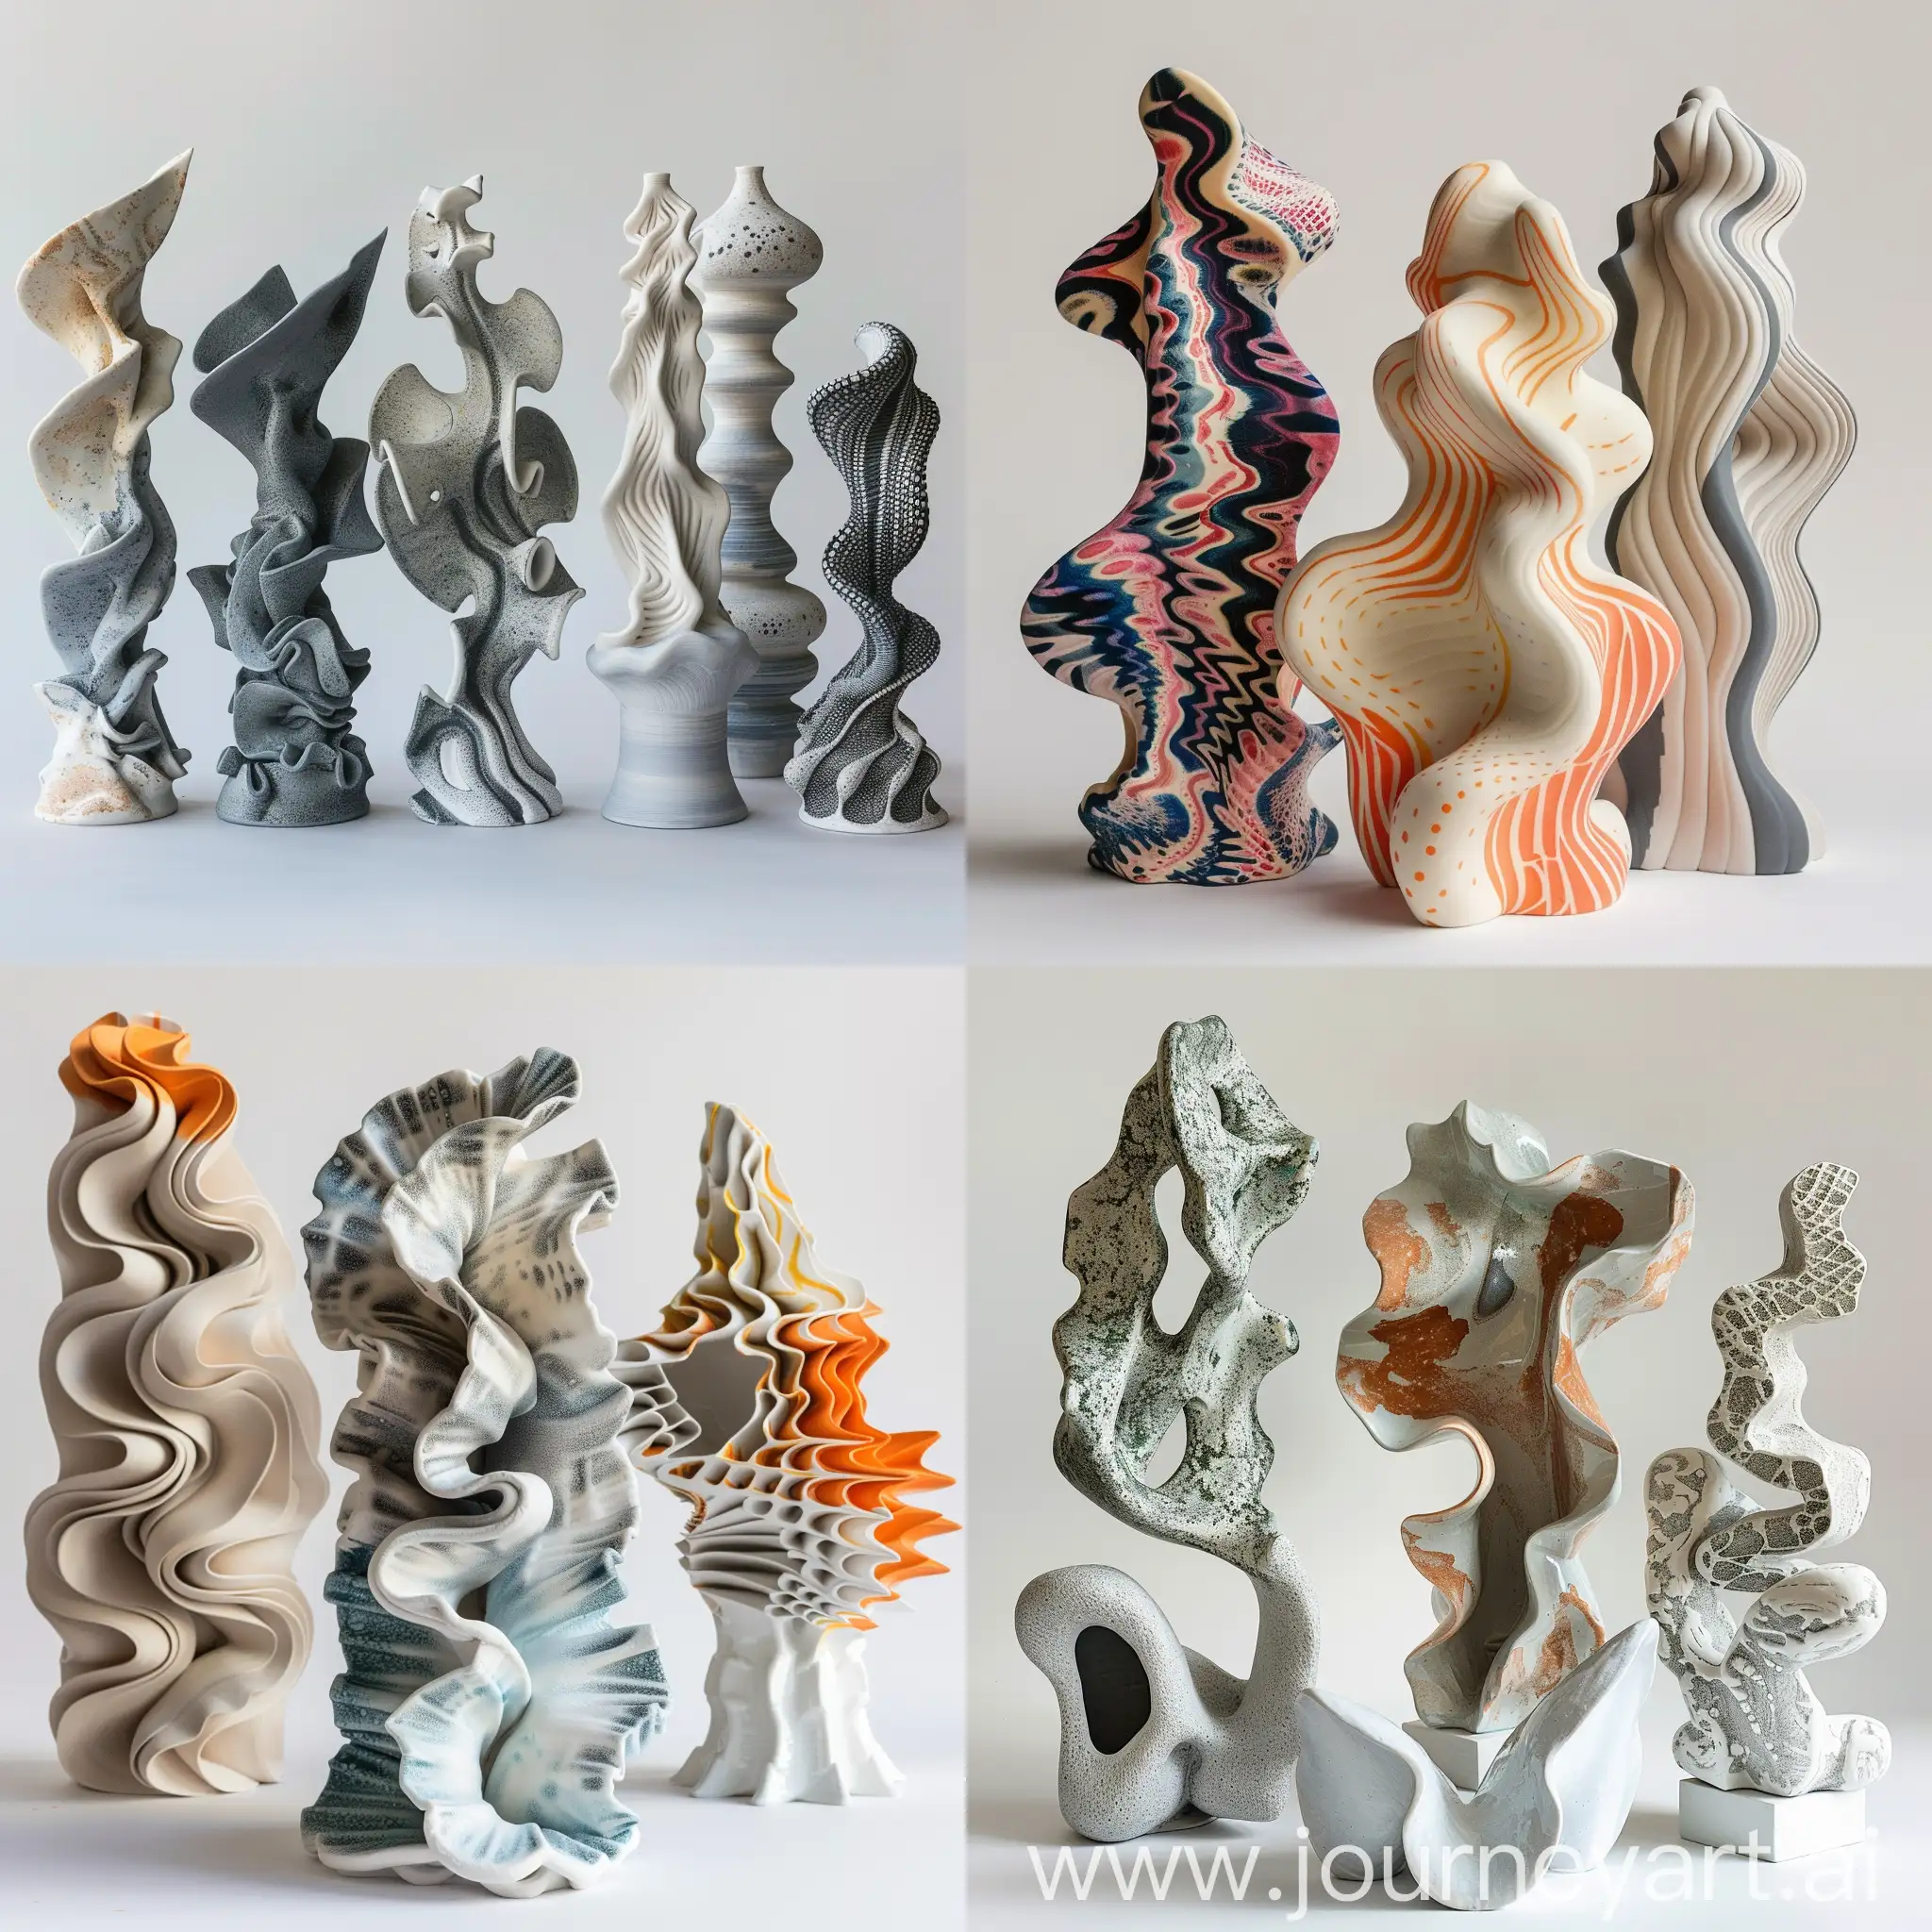 Abstract-Generative-Ceramic-Sculptures-A-Fusion-of-Neural-Network-Algorithms-and-Artistic-Expression